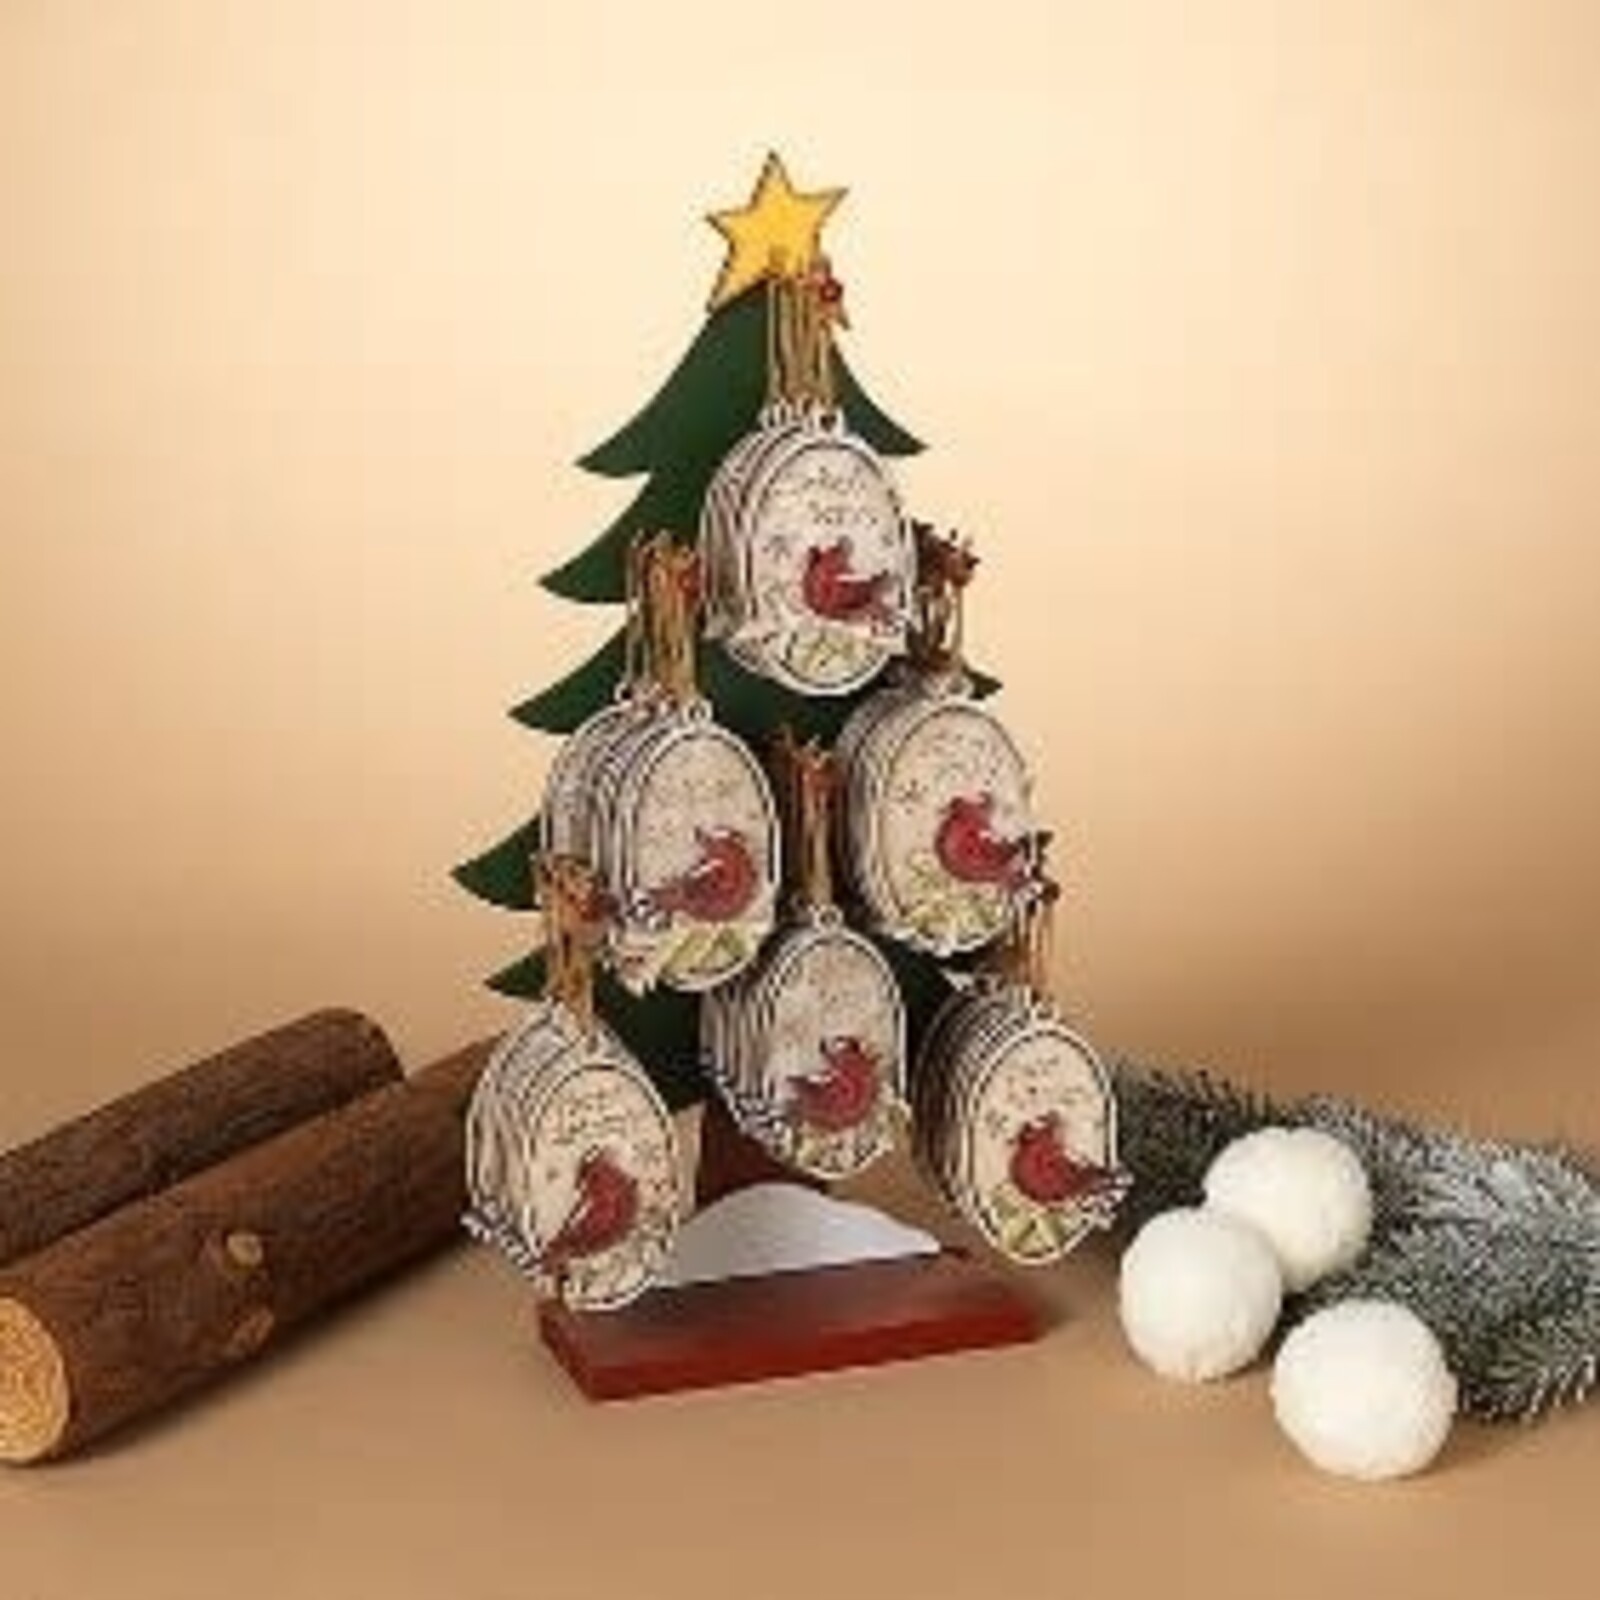 Gerson Wood Holiday Cardinal Ornament   2538080 loading=